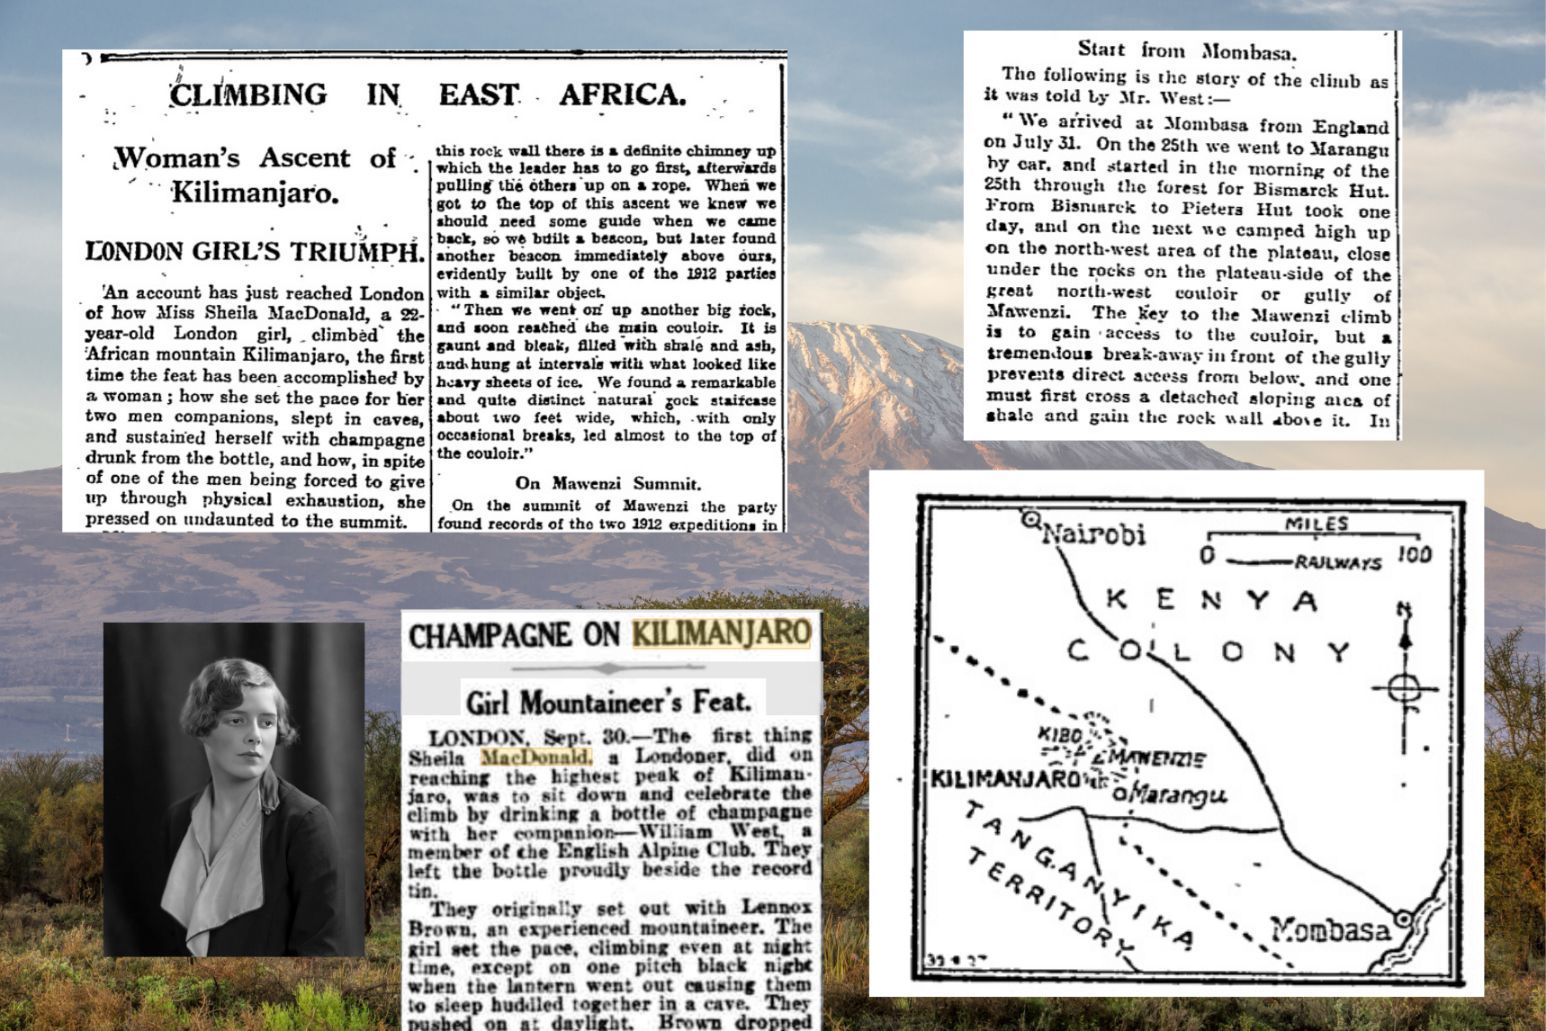 A collage of newspaper clippings showing Sheila MacDonald's achievement, of being the first woman to climb Kilimanjaro.